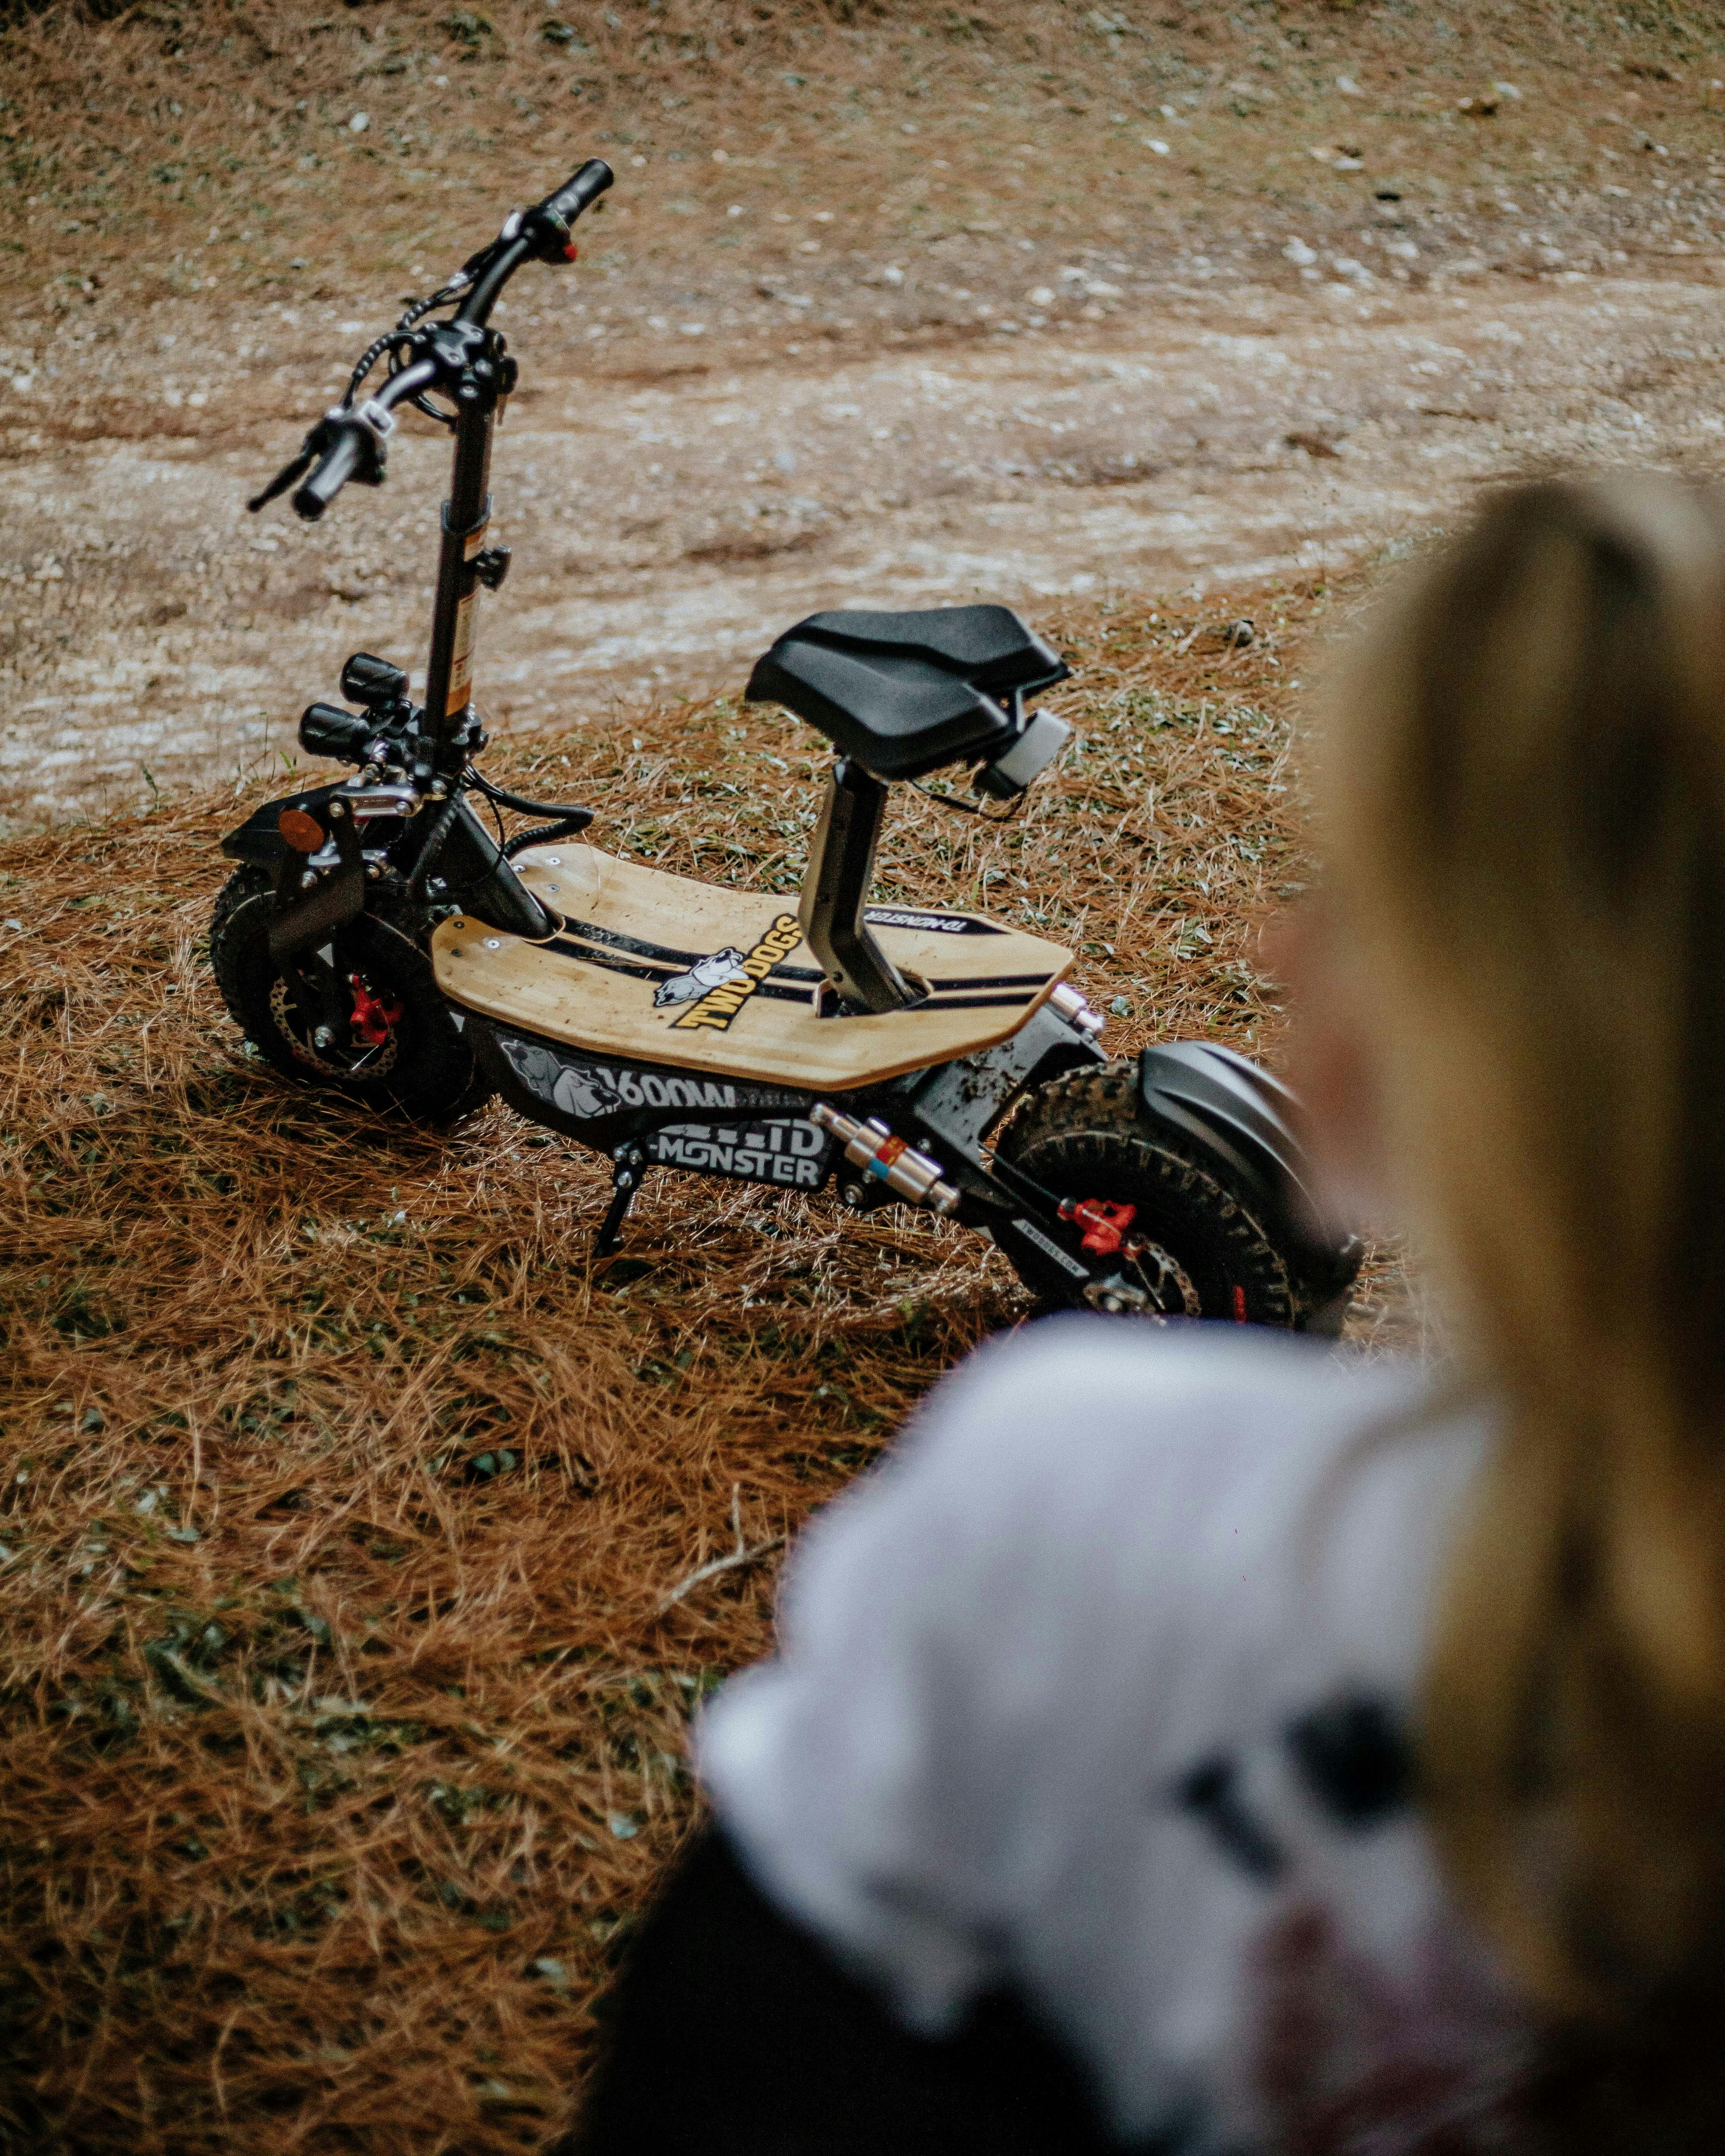 photograph of a scooter on dry grass